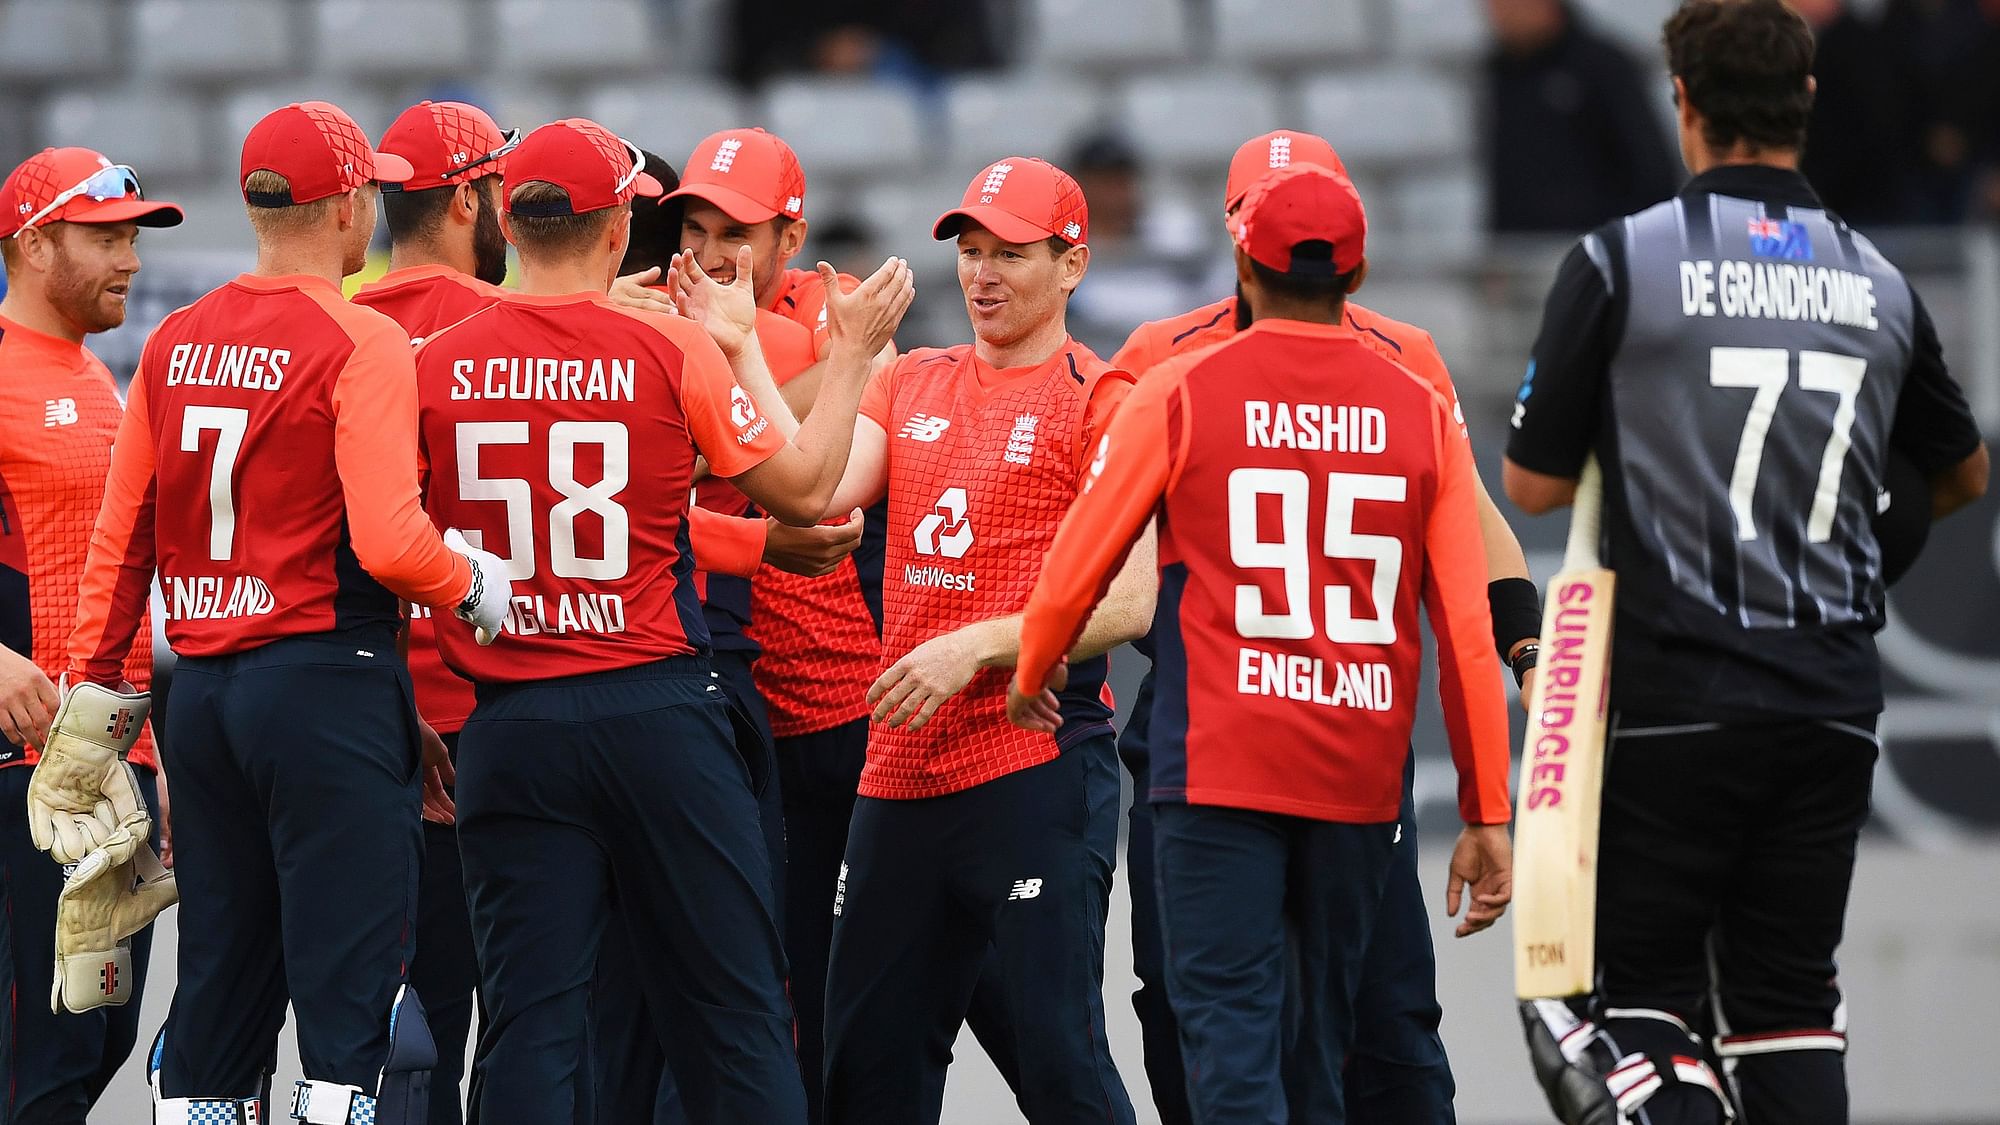 England beat New Zealand in a thrilling Super Over finish to their rain-reduced Twenty20 cricket international Sunday.